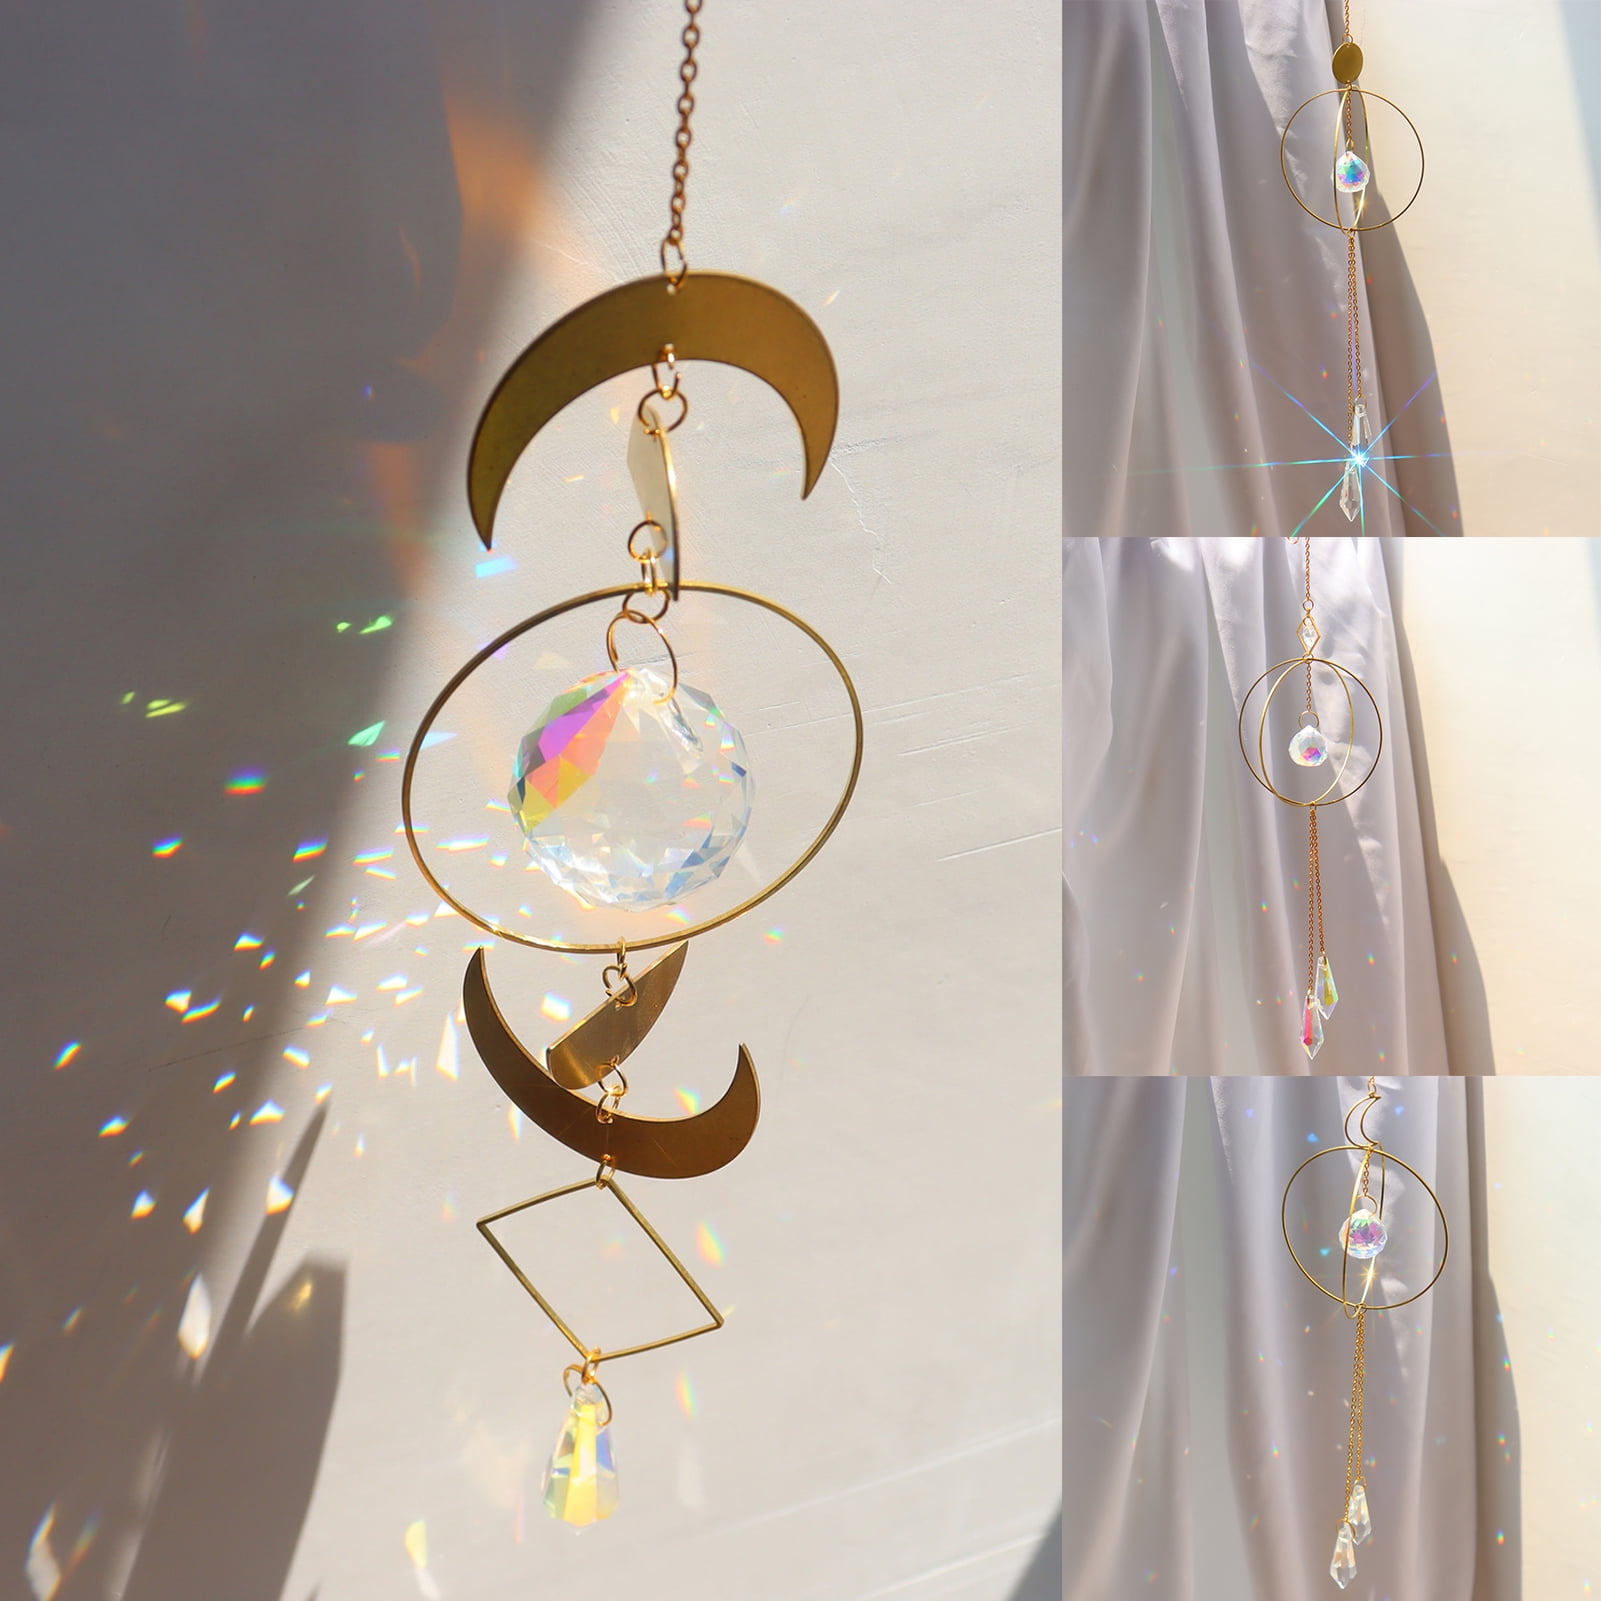 Details about   BRAND NEW 2-in-1 Elegant PENDANT LIGHT or  WALL LIGHT 